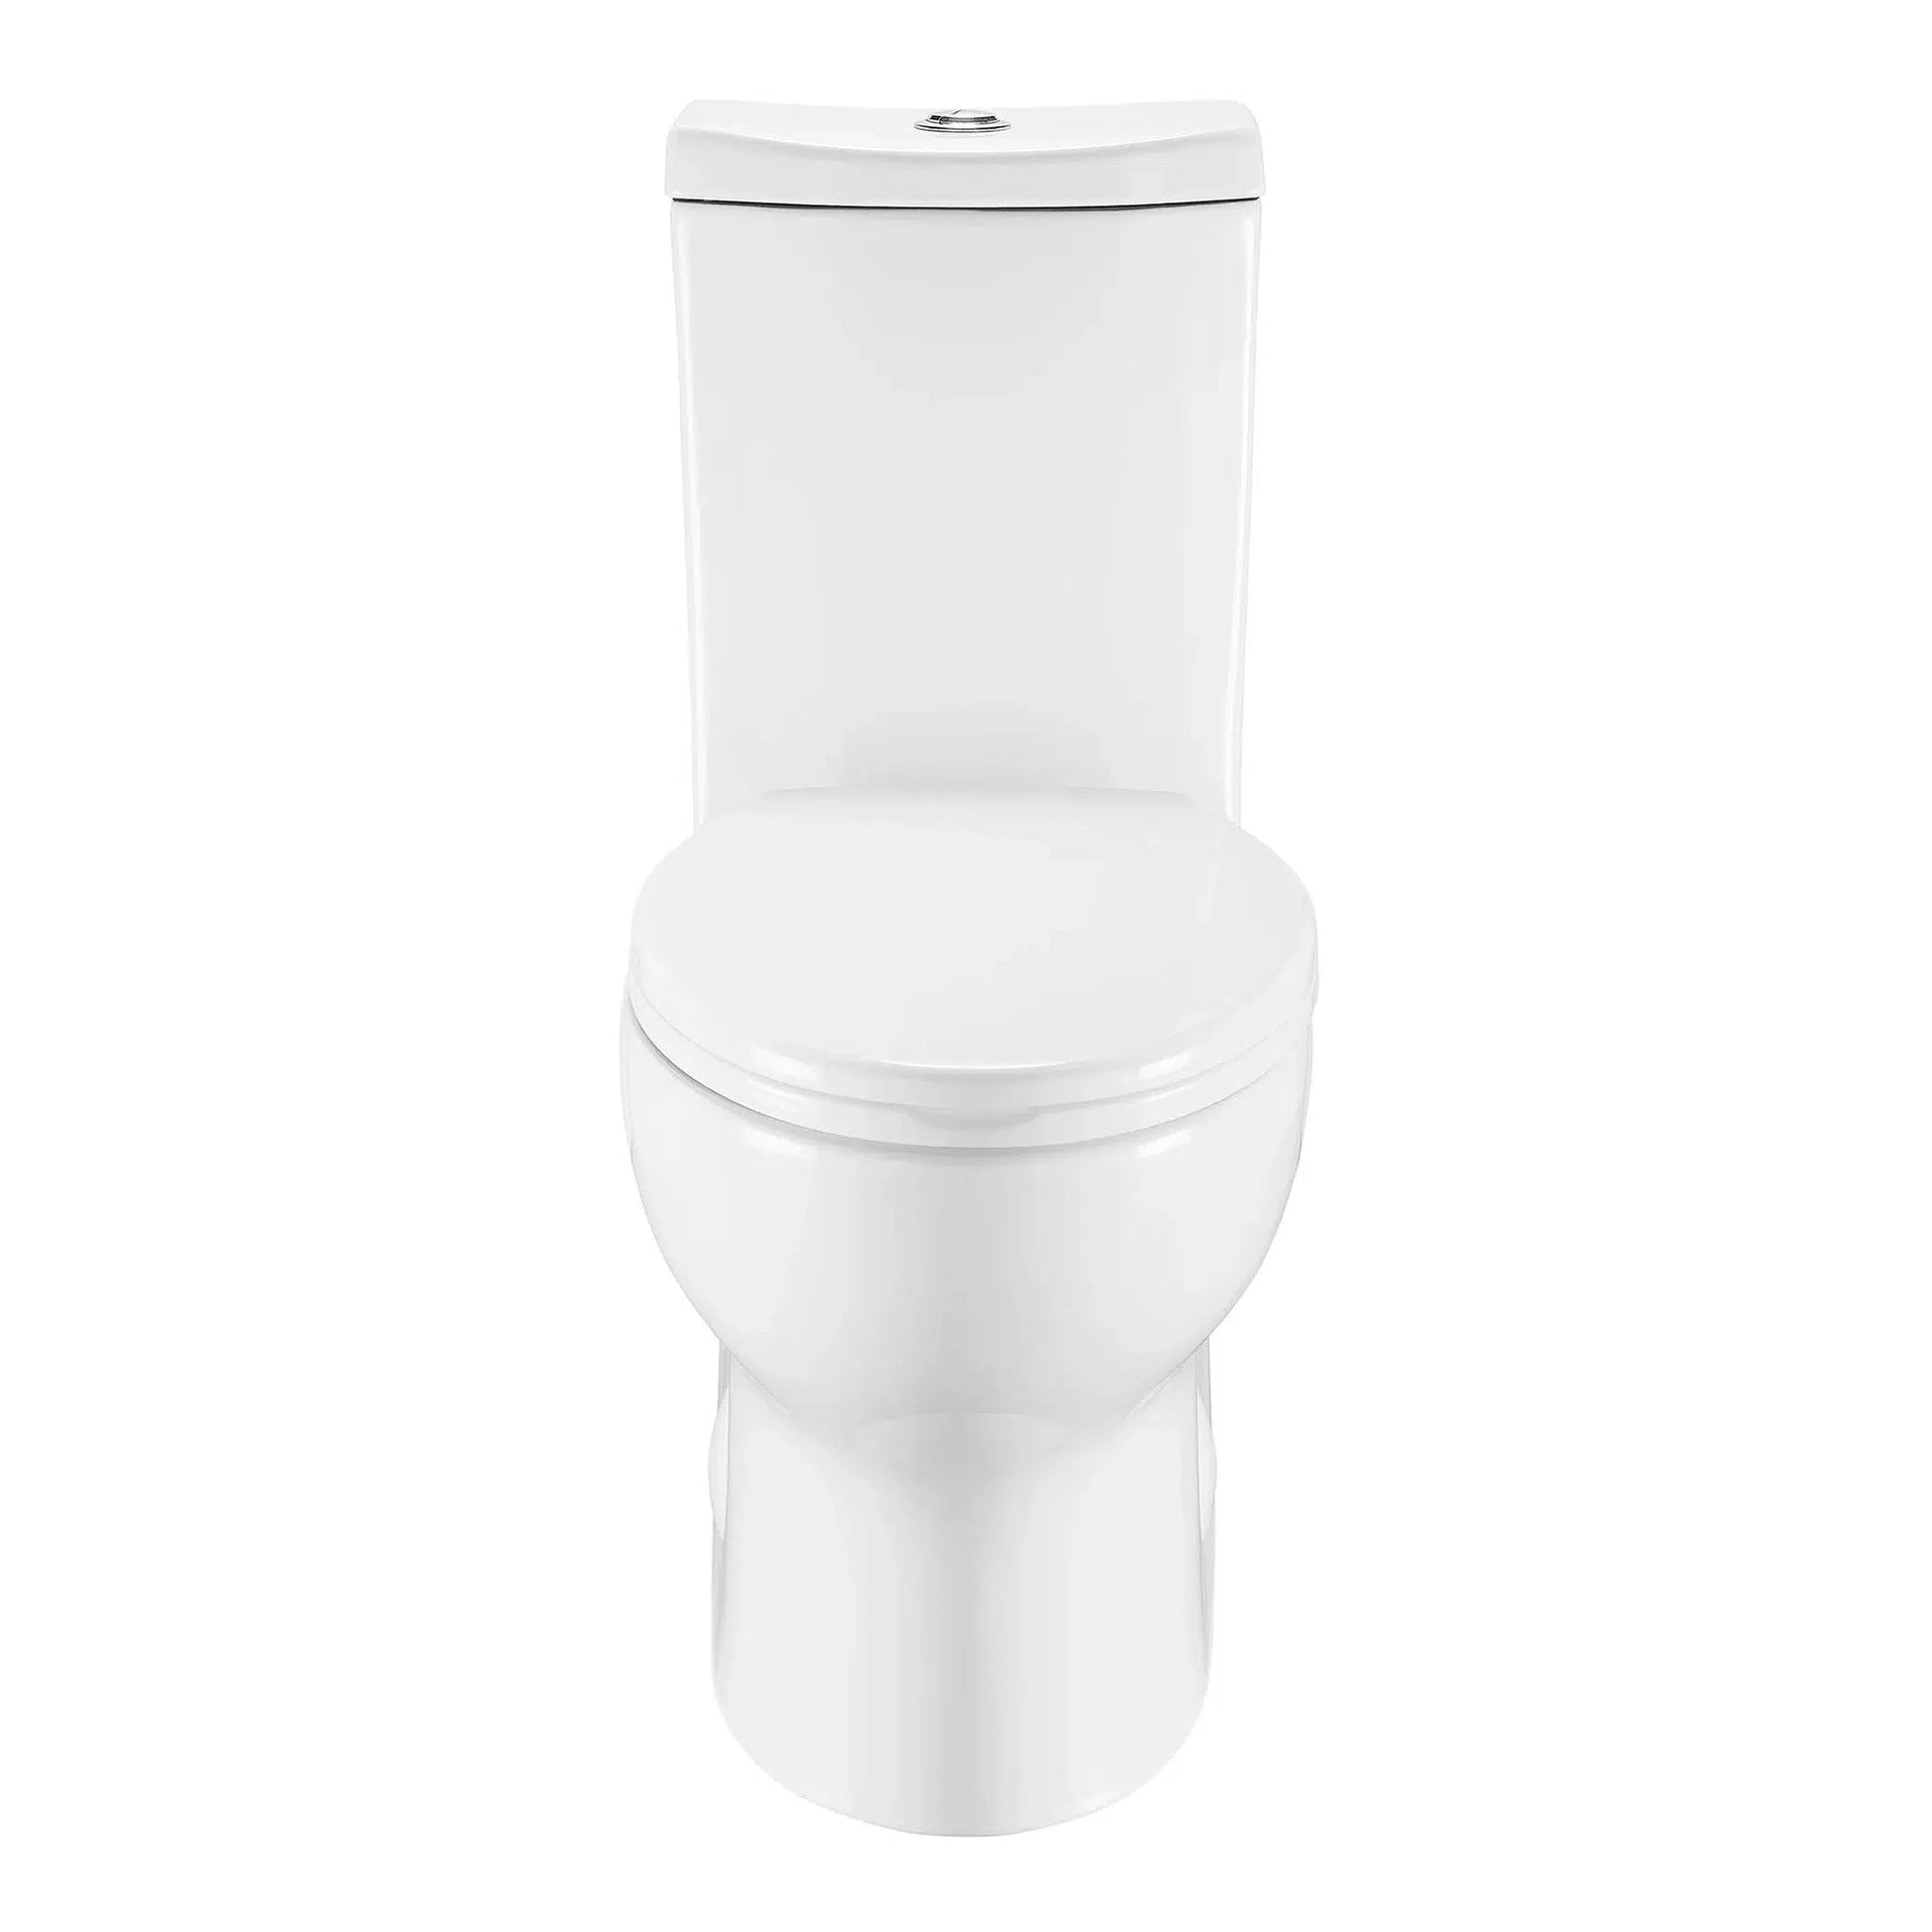 Swiss Madison Plaisir 13" x 32" White One-Piece Elongated Floor Mounted Toilet With 1.1/1.6 GPF Dual-Flush Function